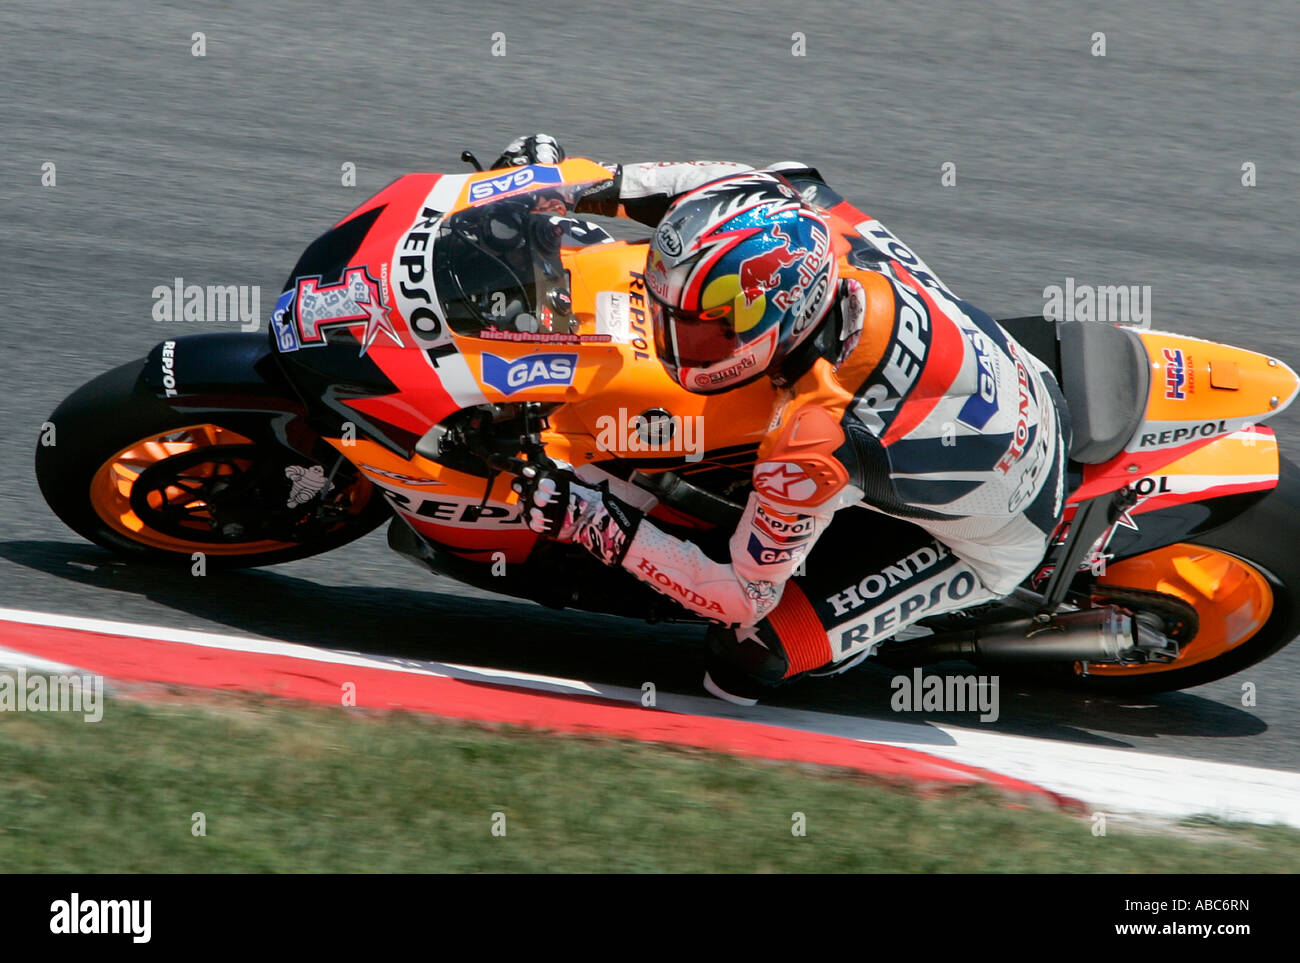 2006 World Champion Nicky Hayden riding for the Repsol Honda team in the  2007 Catalan Moto GP, Montmelo, Barcelona, Spain Stock Photo - Alamy